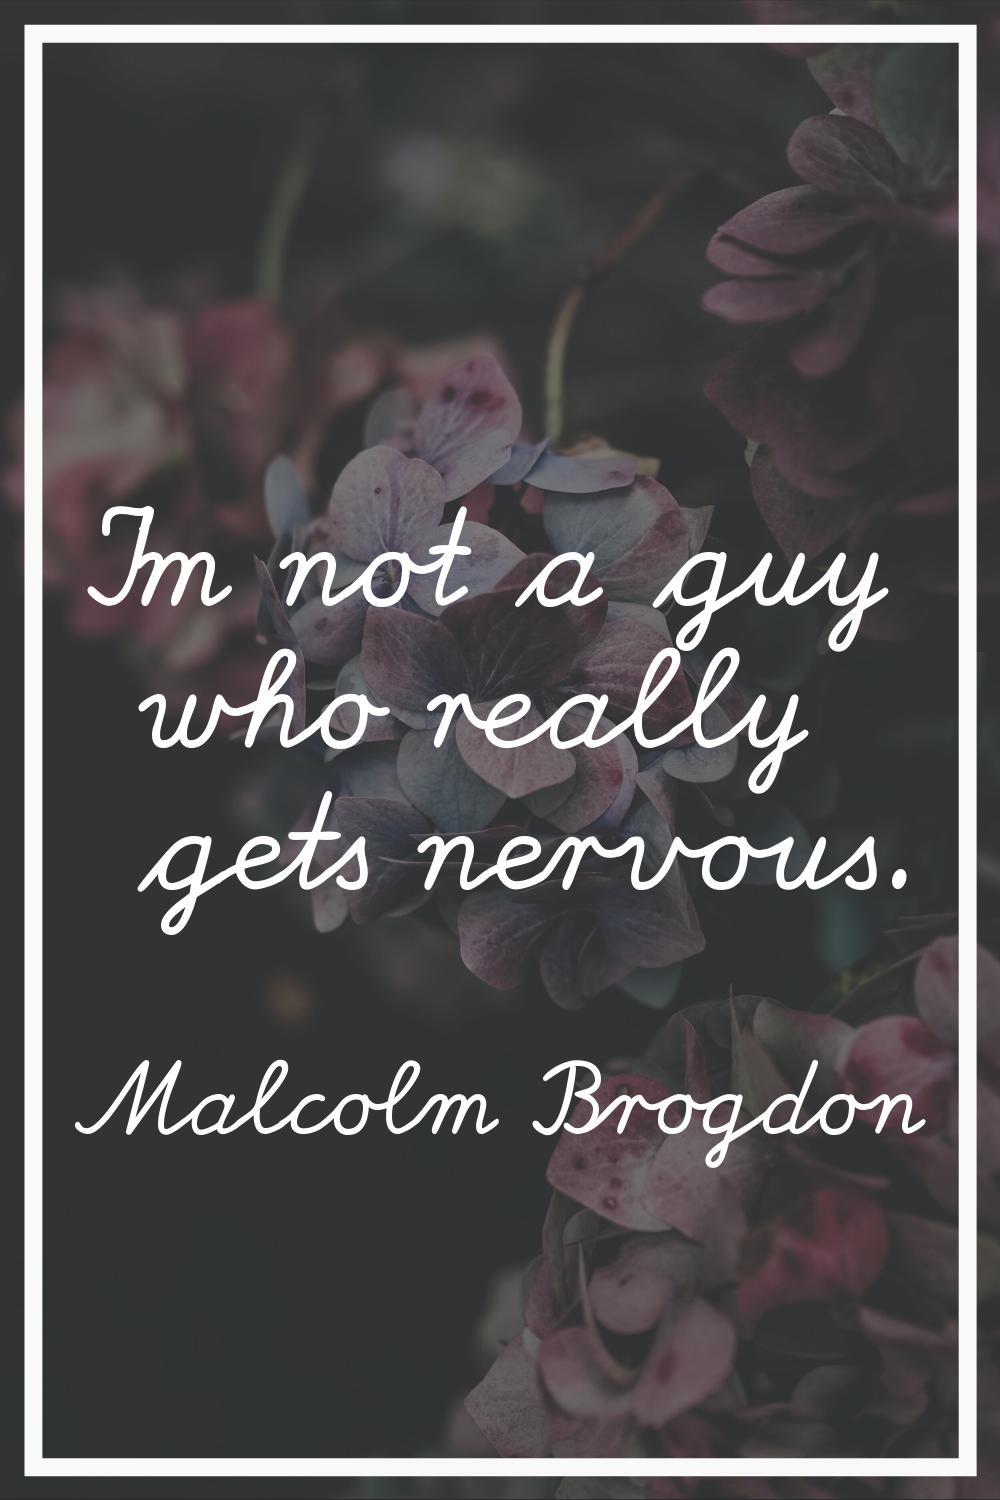 I'm not a guy who really gets nervous.